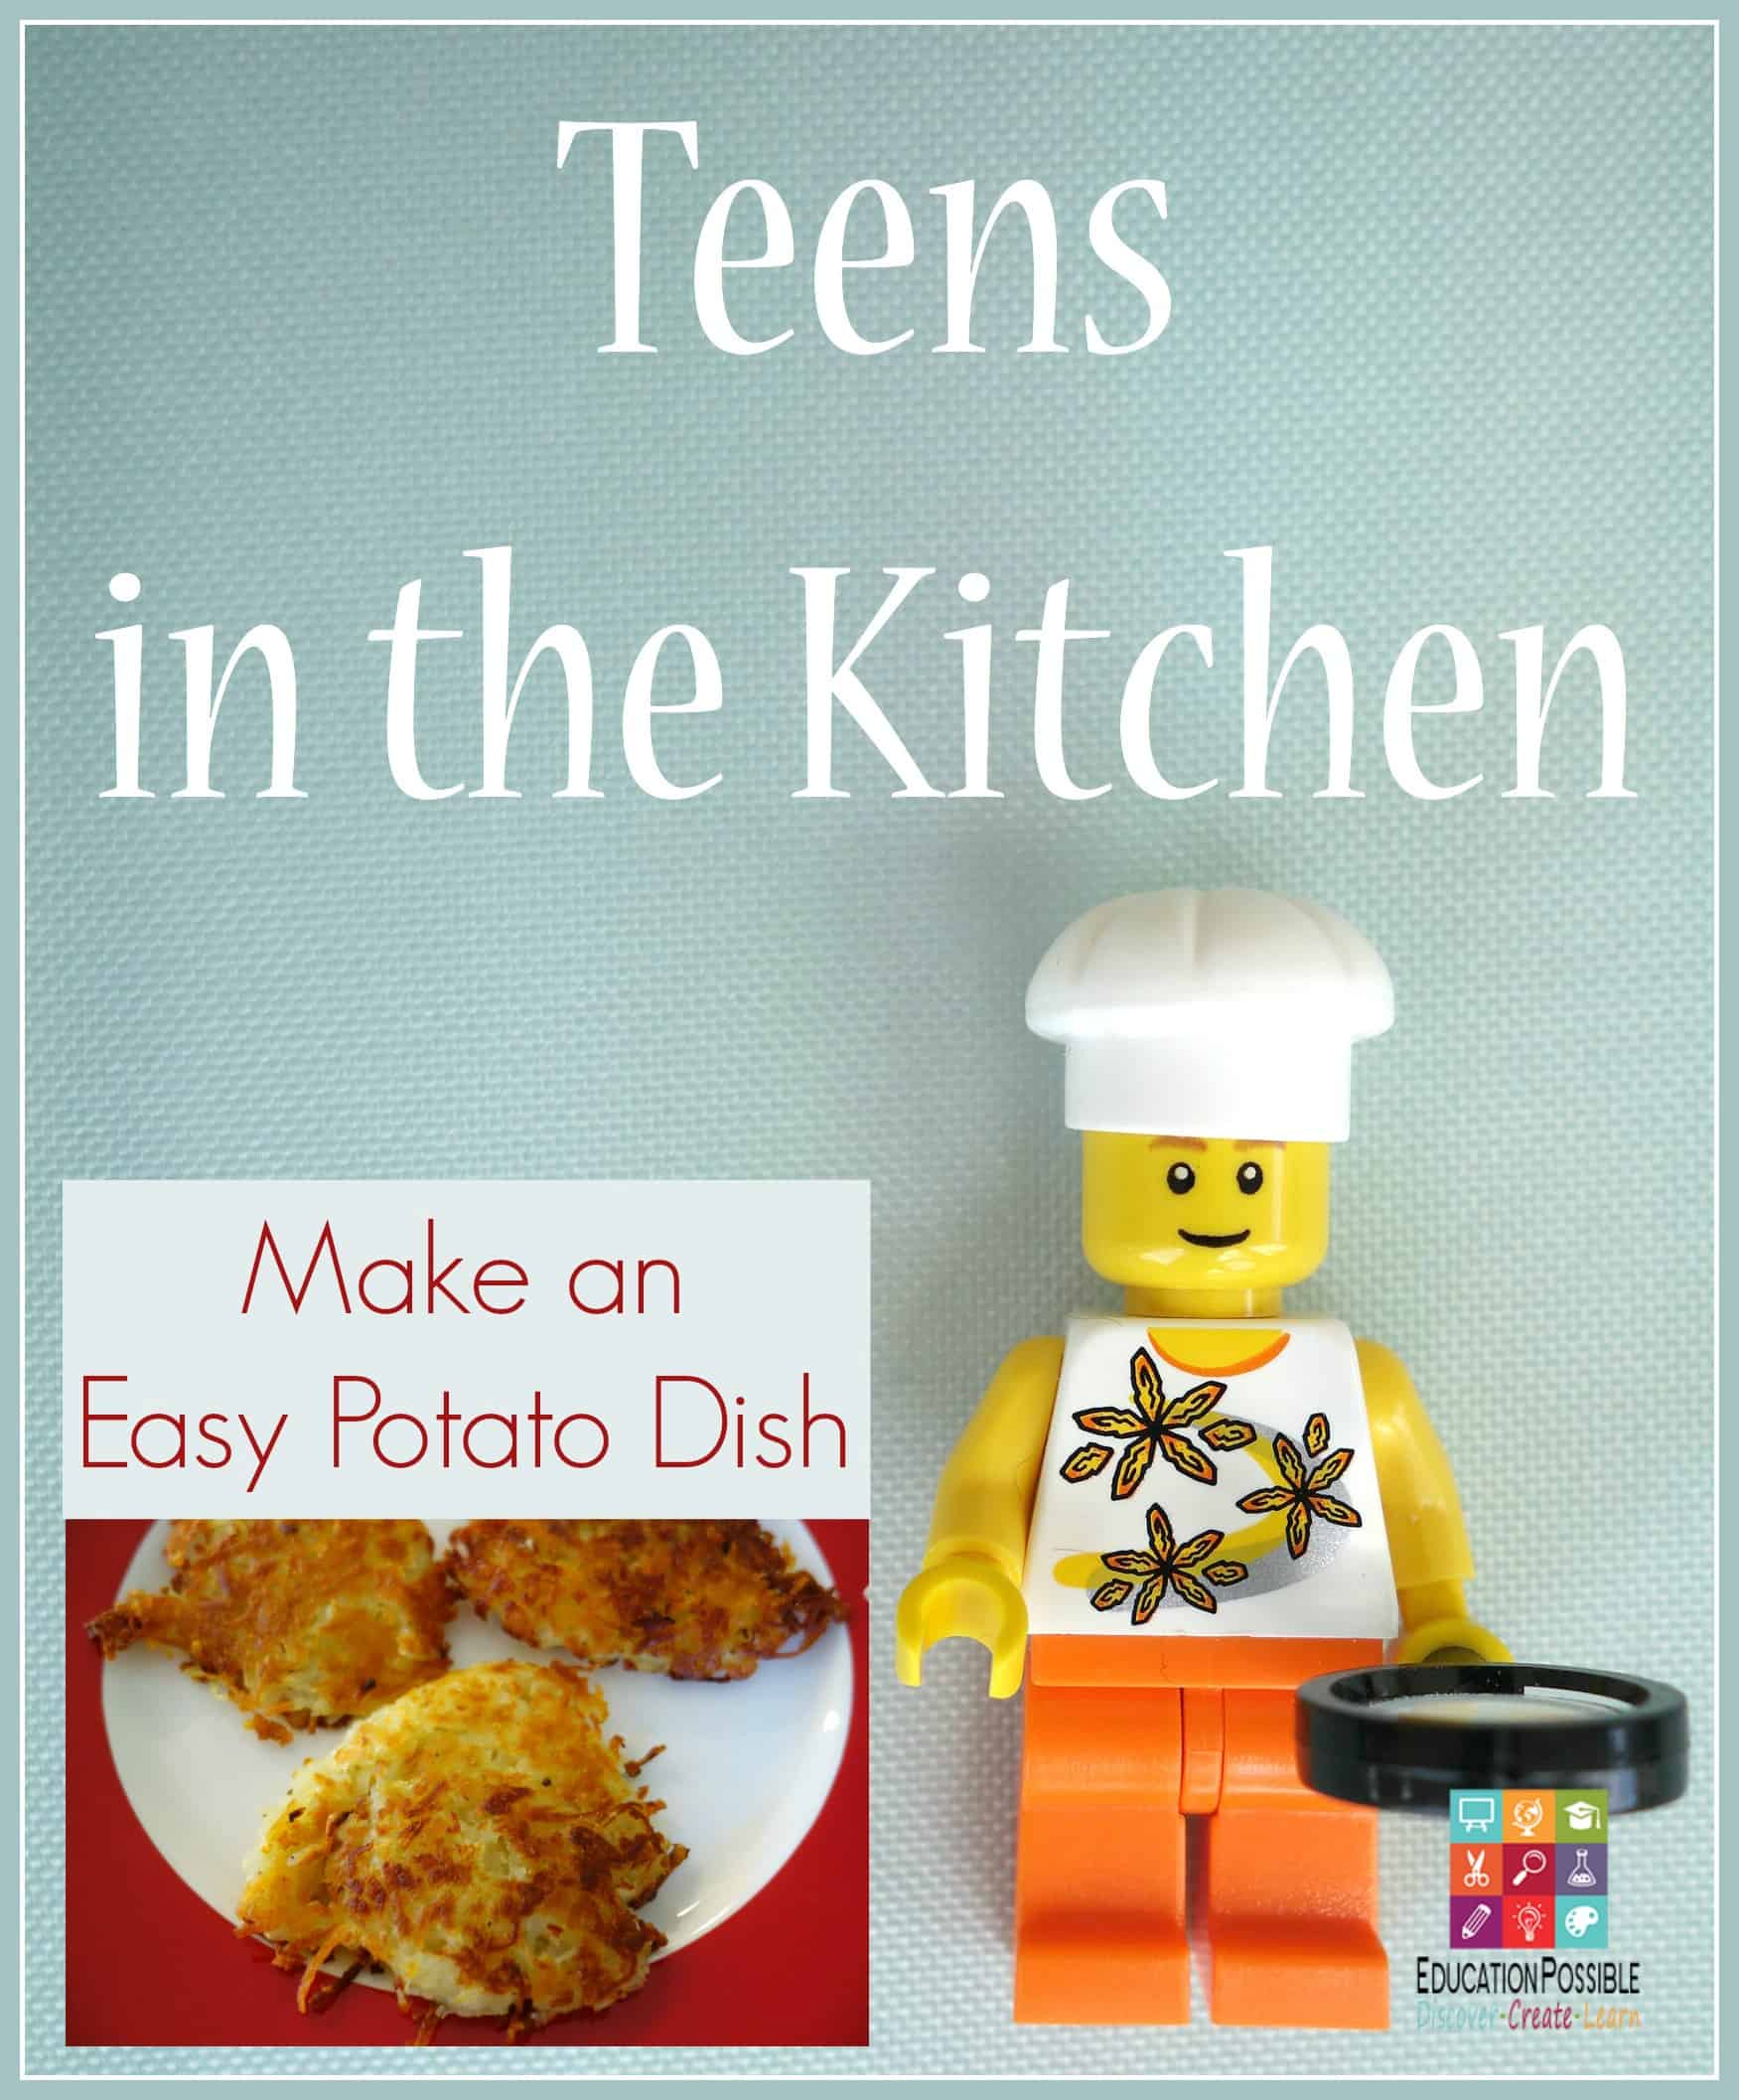 Teens in the Kitchen - Make an Easy Potato Dish - Education Possible